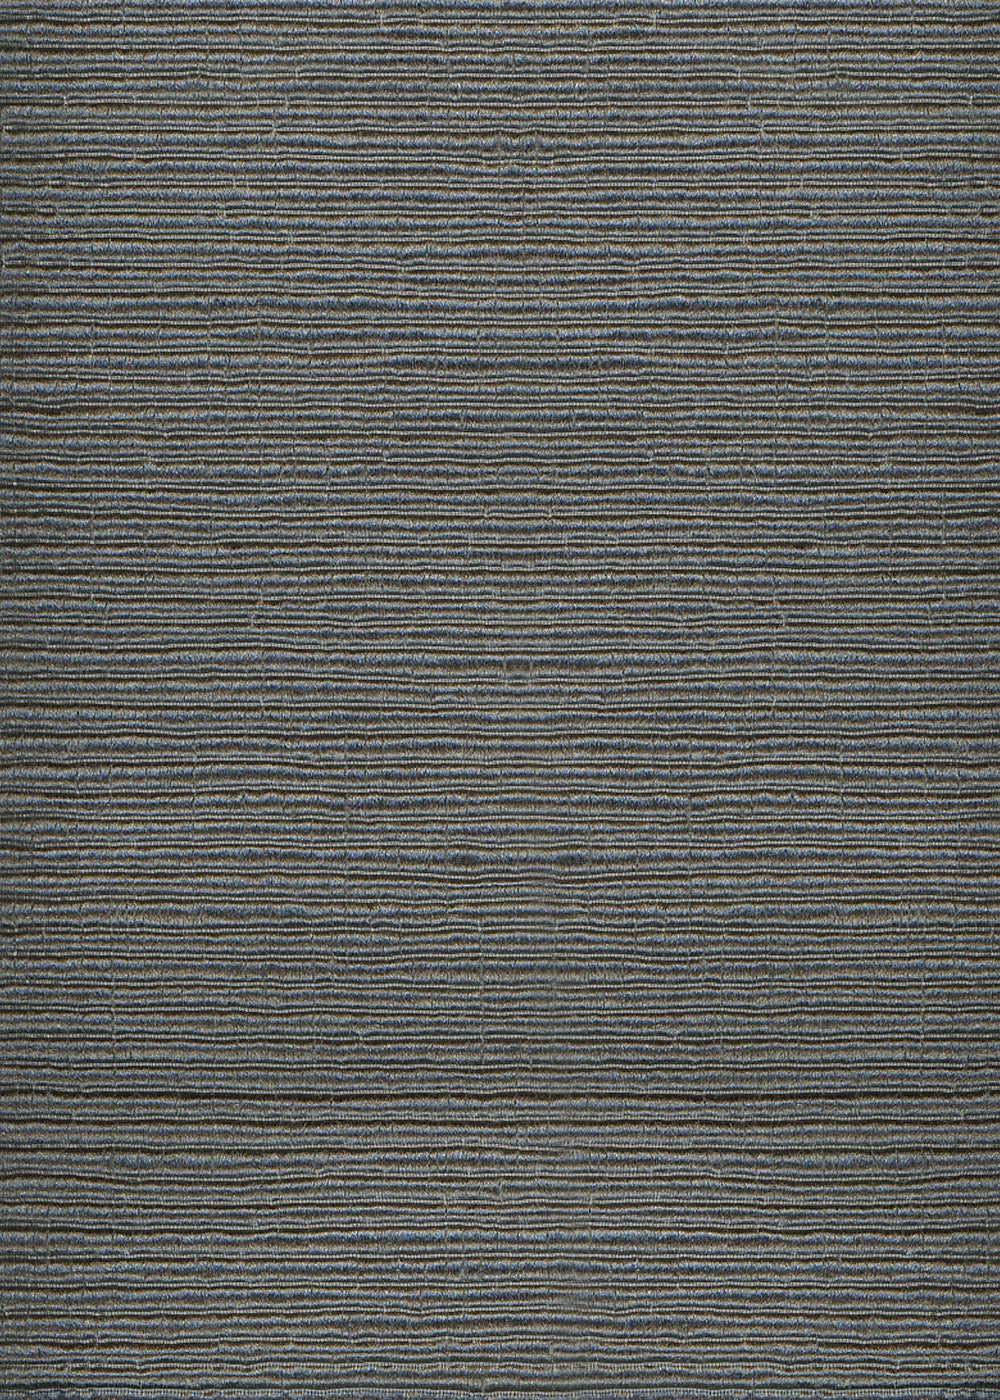 slate grey fabric with a horizontal ribbed texture